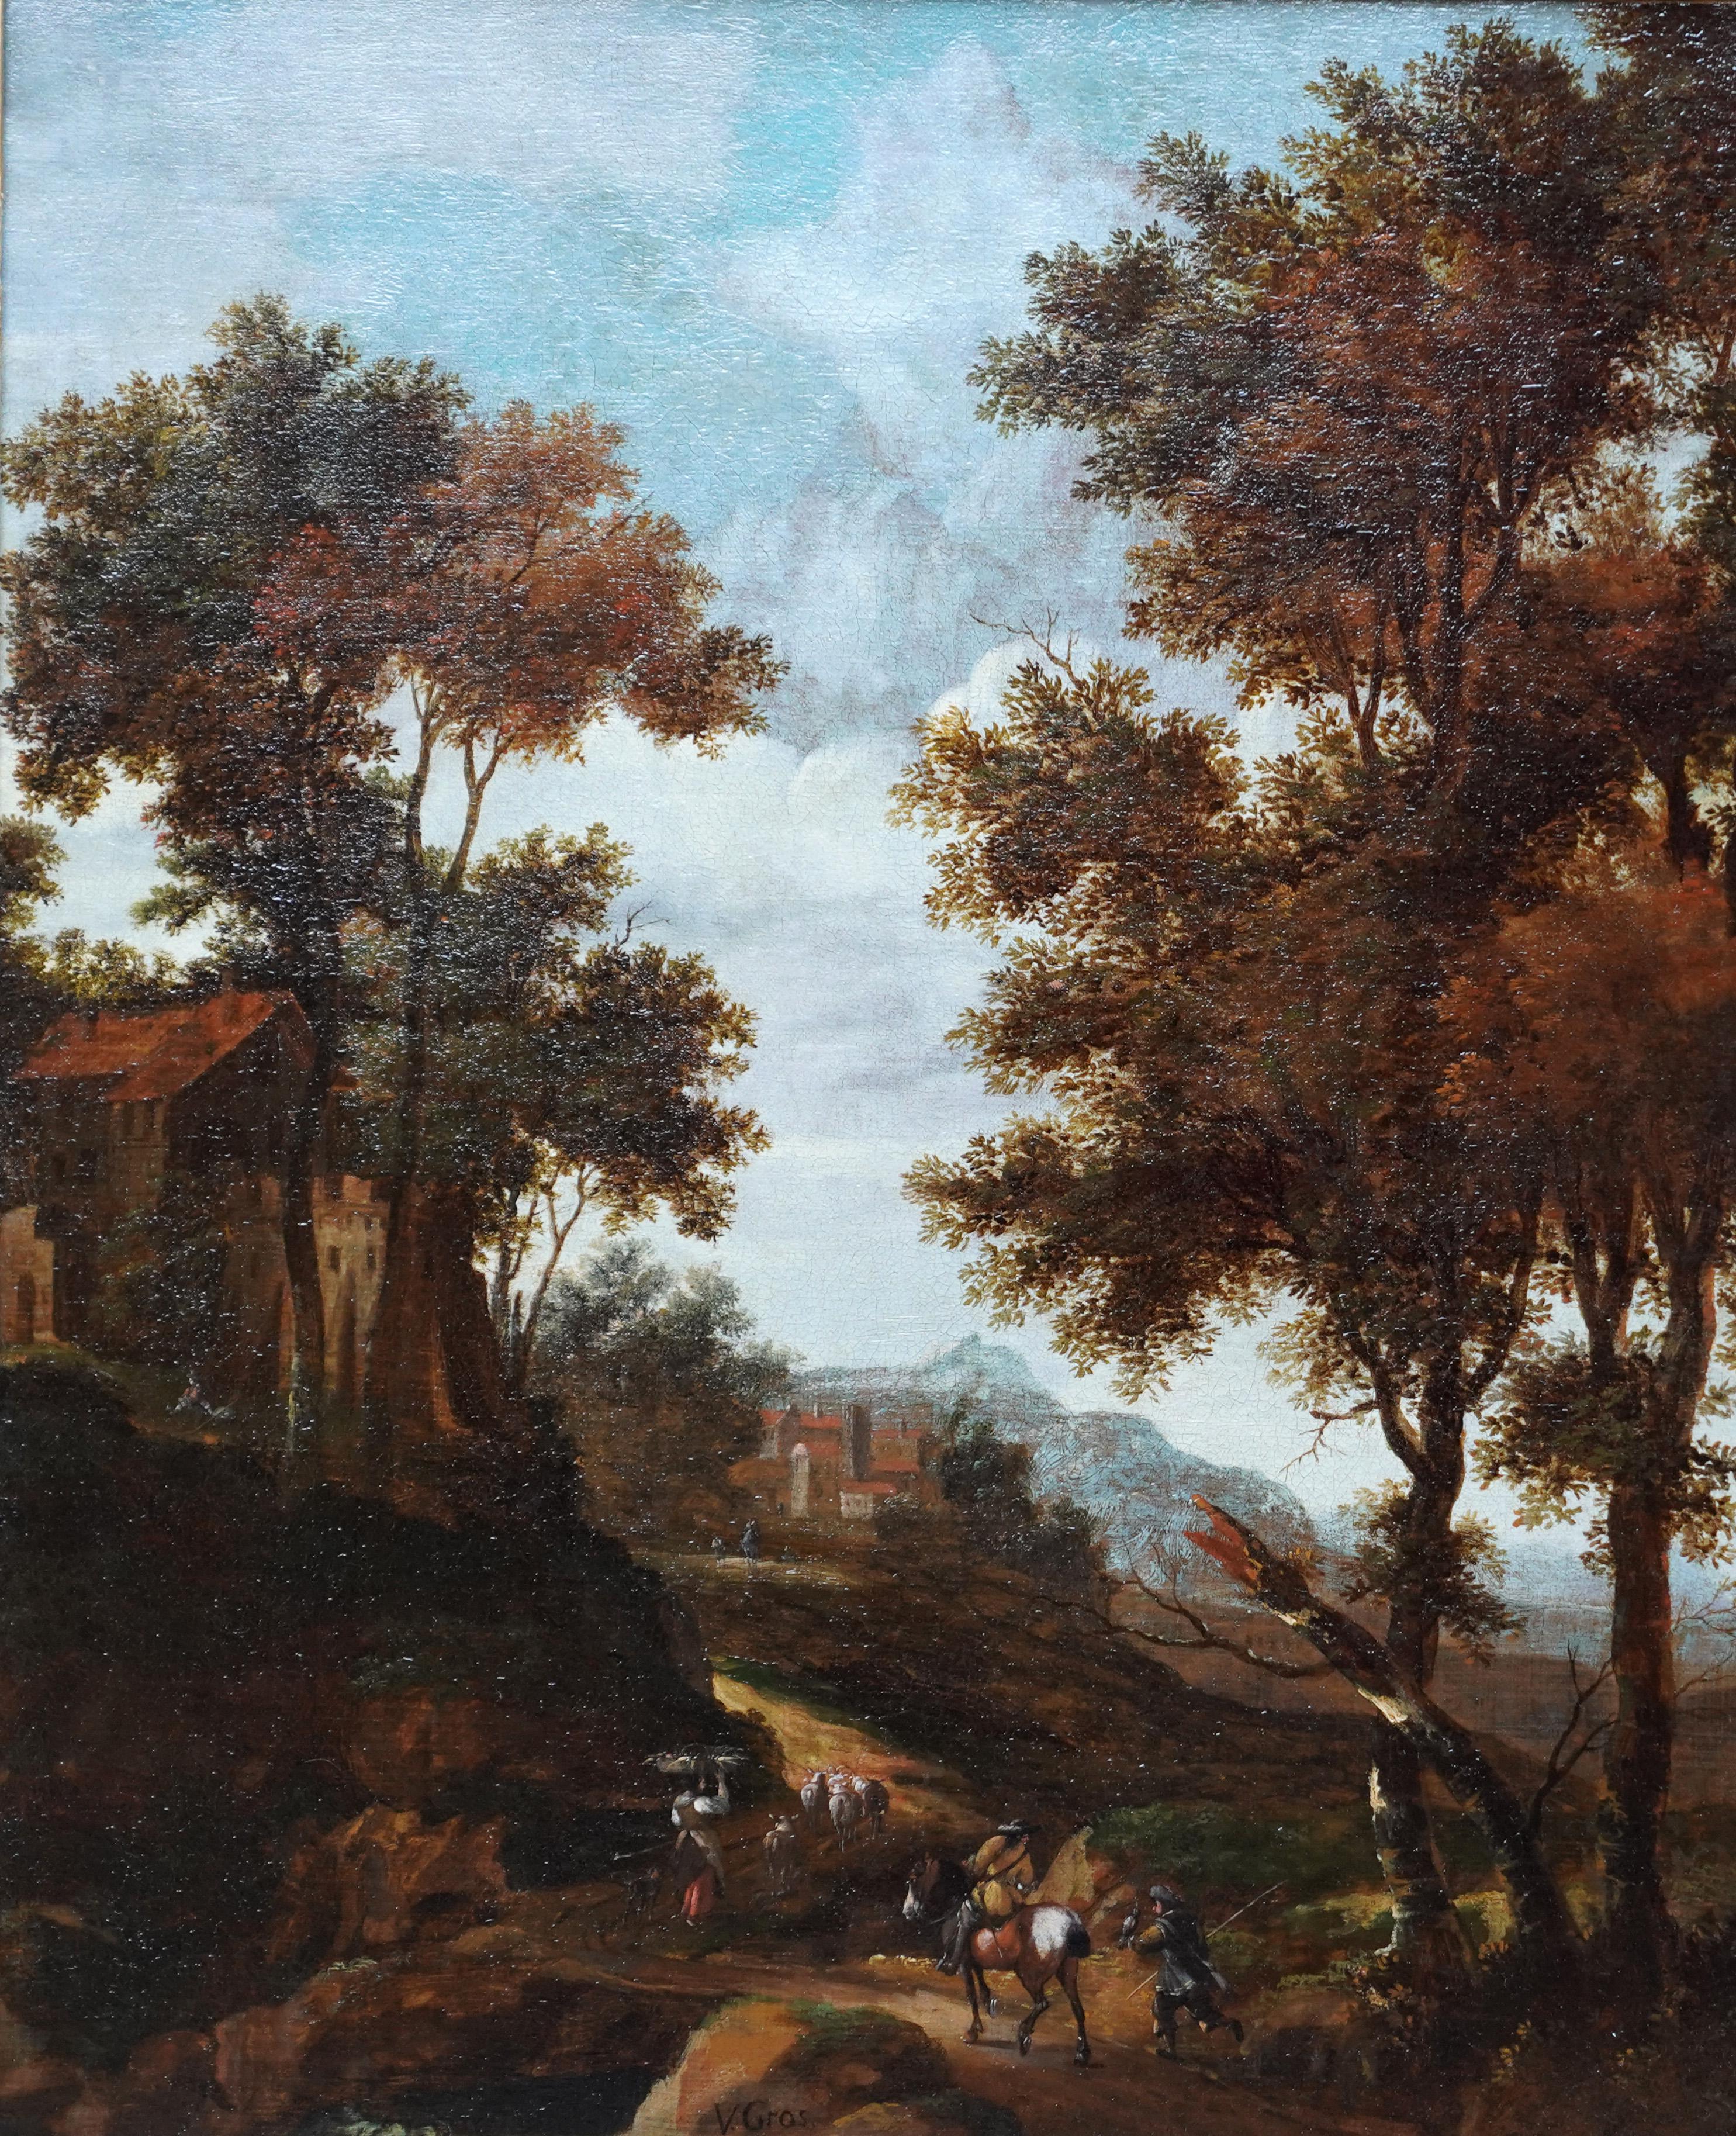 Italian Landscape with Travellers - Dutch Golden Age 17thC art oil painting - Painting by Jacob van der Croos